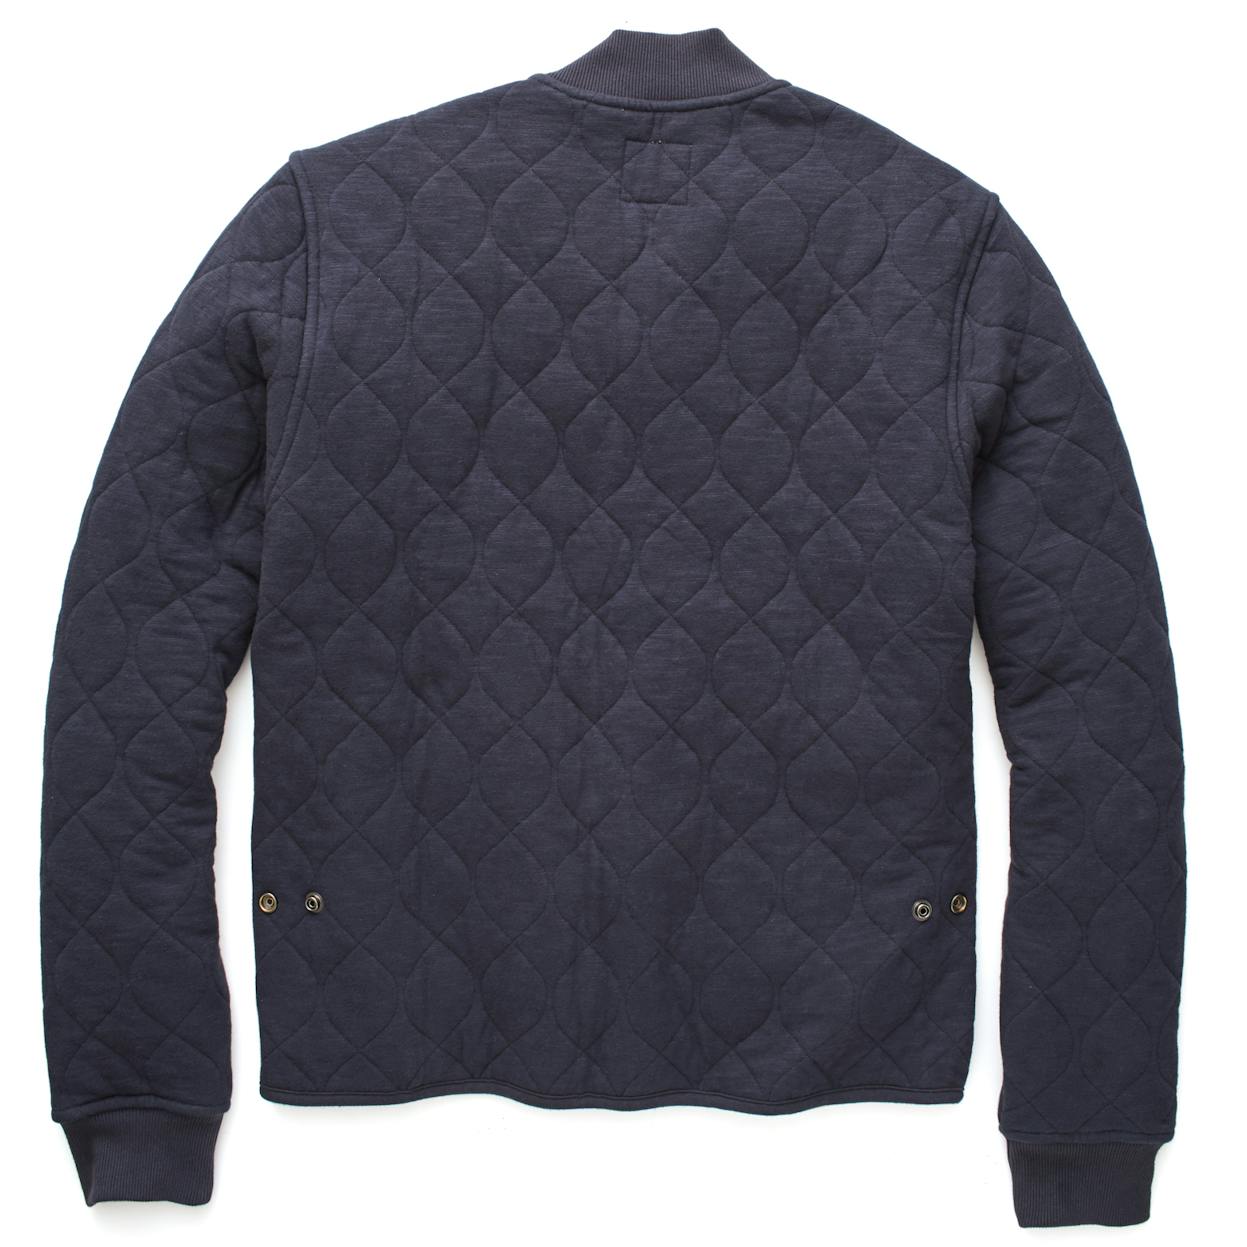 Todd Snyder x Champion Quilted Bomber - Navy | Trucker Jackets | Huckberry